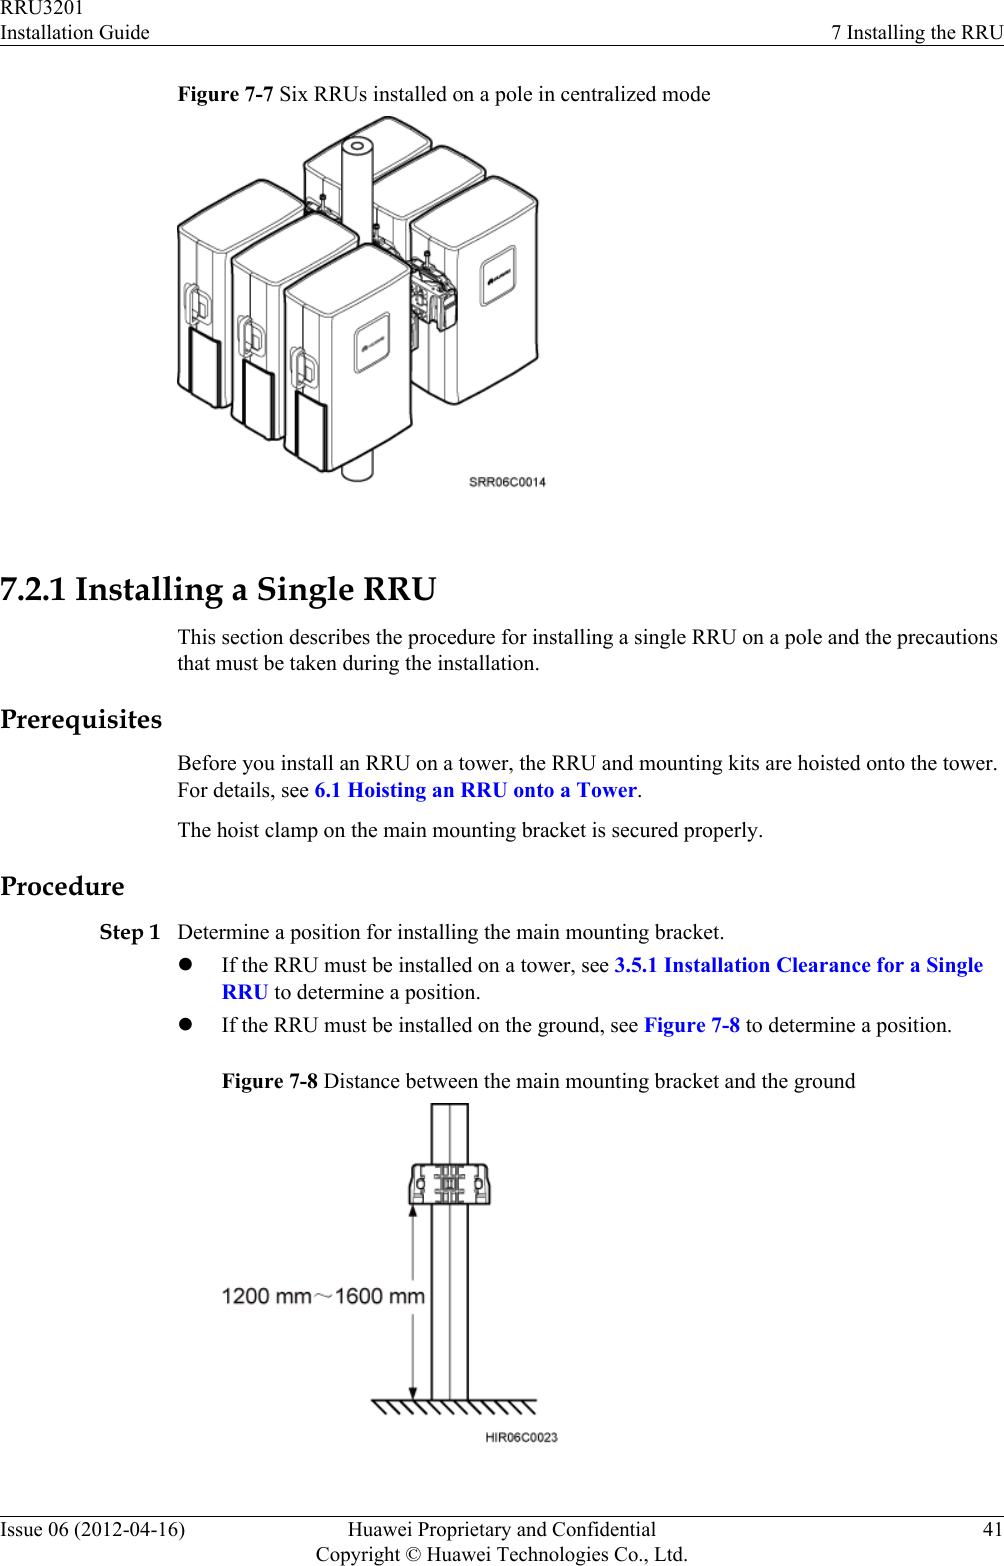 Figure 7-7 Six RRUs installed on a pole in centralized mode 7.2.1 Installing a Single RRUThis section describes the procedure for installing a single RRU on a pole and the precautionsthat must be taken during the installation.PrerequisitesBefore you install an RRU on a tower, the RRU and mounting kits are hoisted onto the tower.For details, see 6.1 Hoisting an RRU onto a Tower.The hoist clamp on the main mounting bracket is secured properly.ProcedureStep 1 Determine a position for installing the main mounting bracket.lIf the RRU must be installed on a tower, see 3.5.1 Installation Clearance for a SingleRRU to determine a position.lIf the RRU must be installed on the ground, see Figure 7-8 to determine a position.Figure 7-8 Distance between the main mounting bracket and the groundRRU3201Installation Guide 7 Installing the RRUIssue 06 (2012-04-16) Huawei Proprietary and ConfidentialCopyright © Huawei Technologies Co., Ltd.41